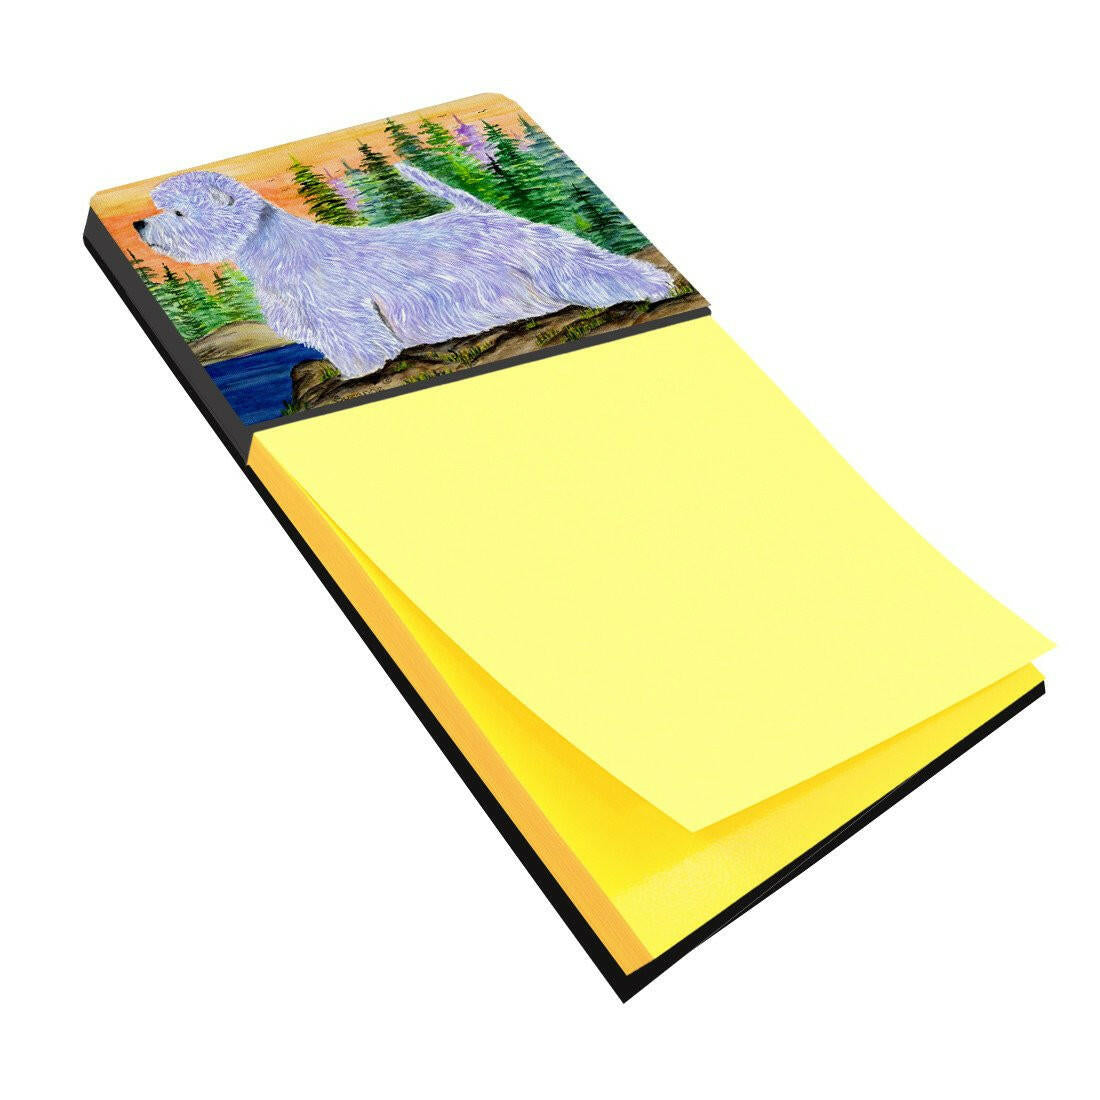 Westie Refiillable Sticky Note Holder or Postit Note Dispenser SS8418SN by Caroline's Treasures